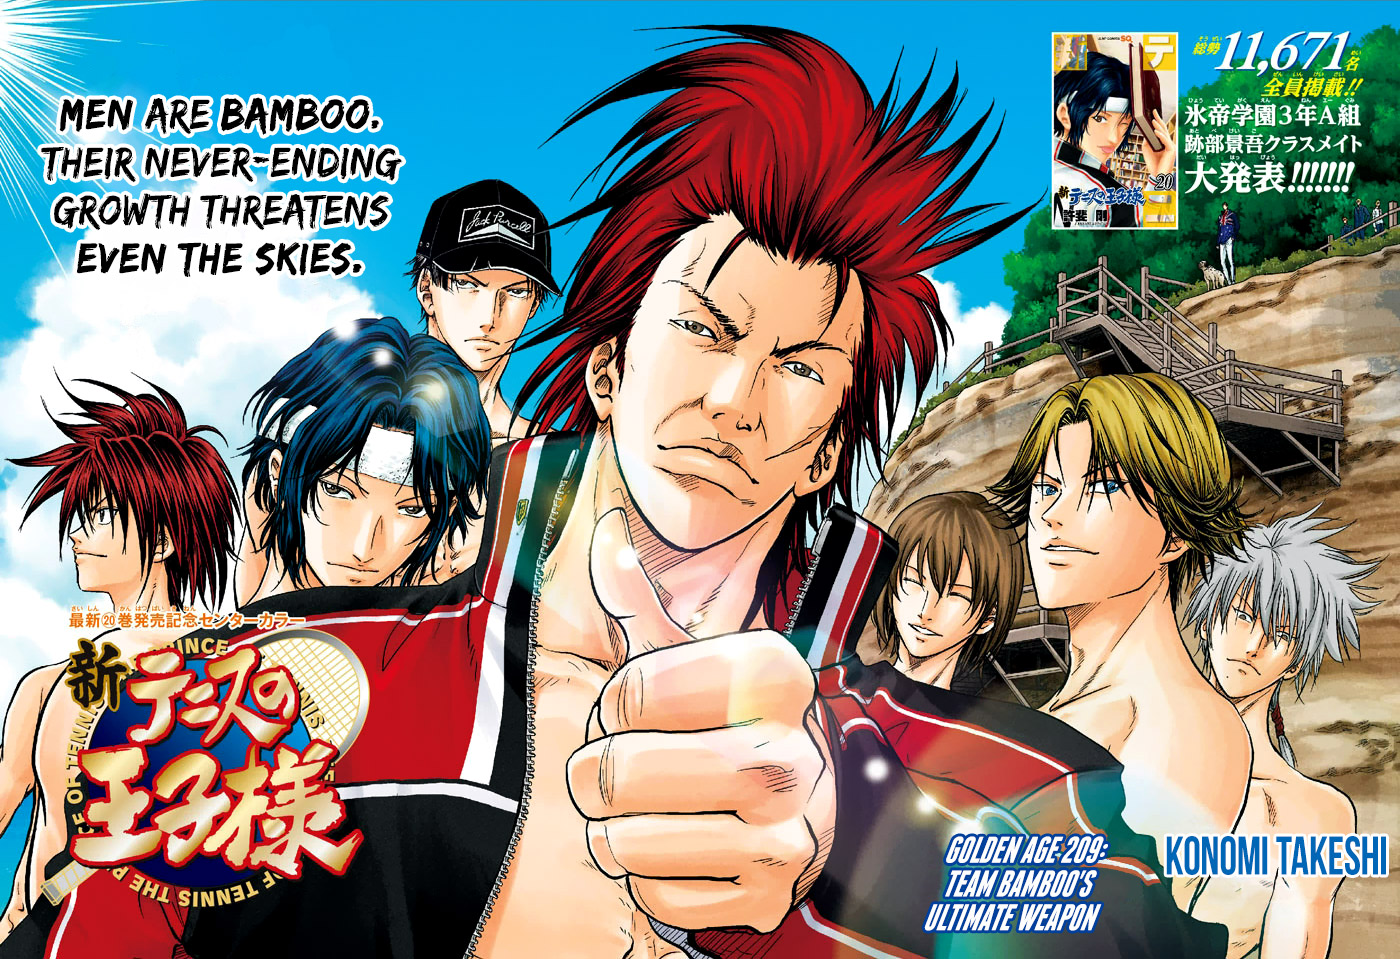 New Prince of Tennis 209